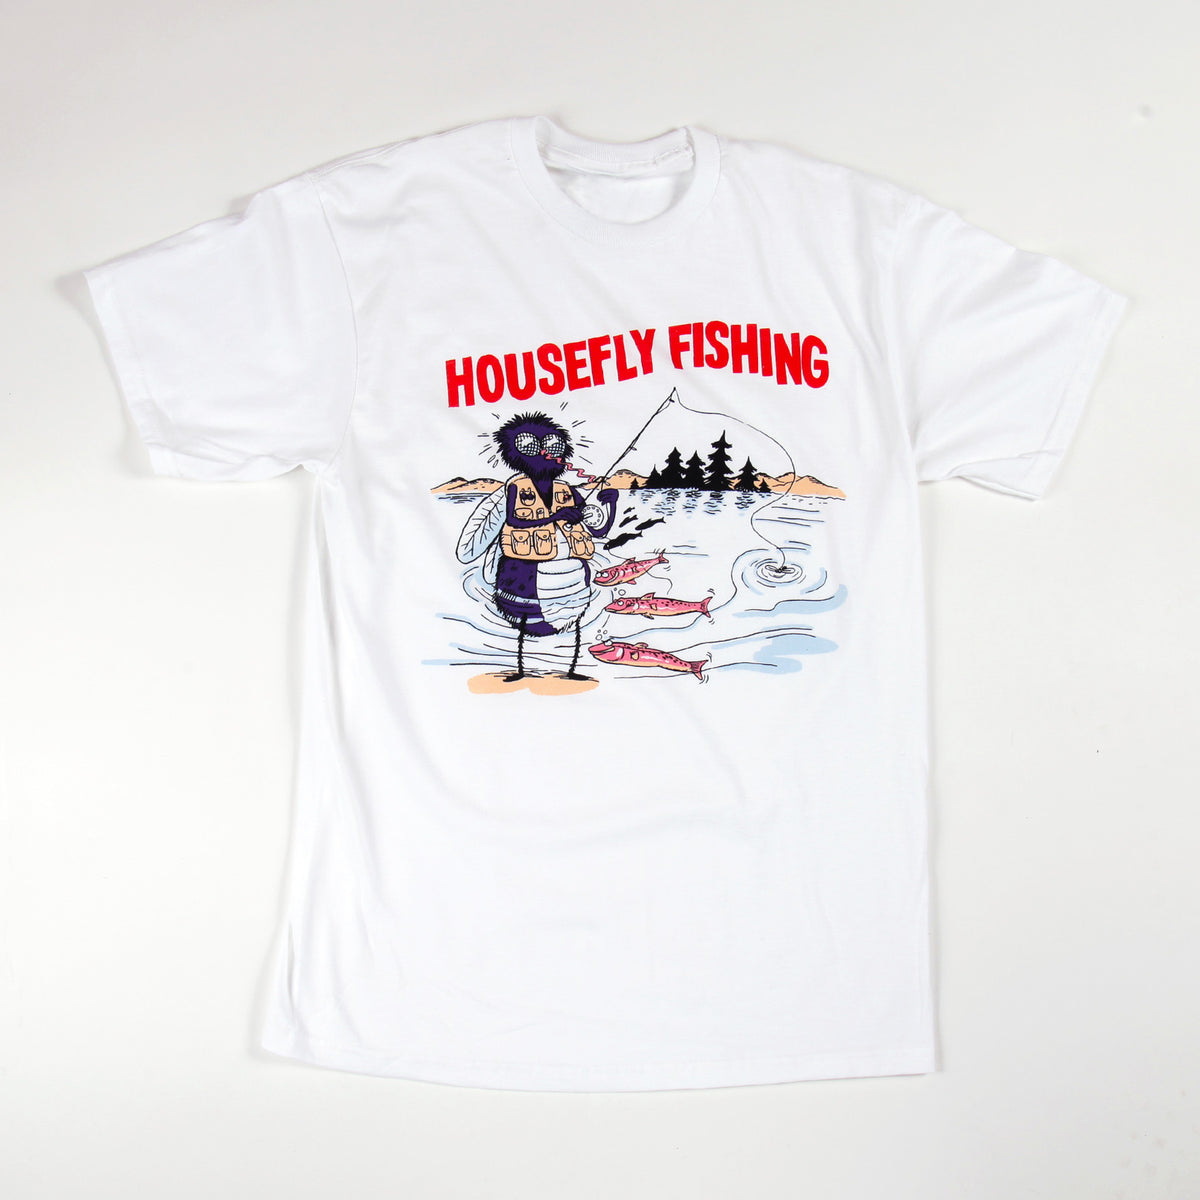 Explore the Joy of Fly Fishing with this Funny Fisherman T-Shirt